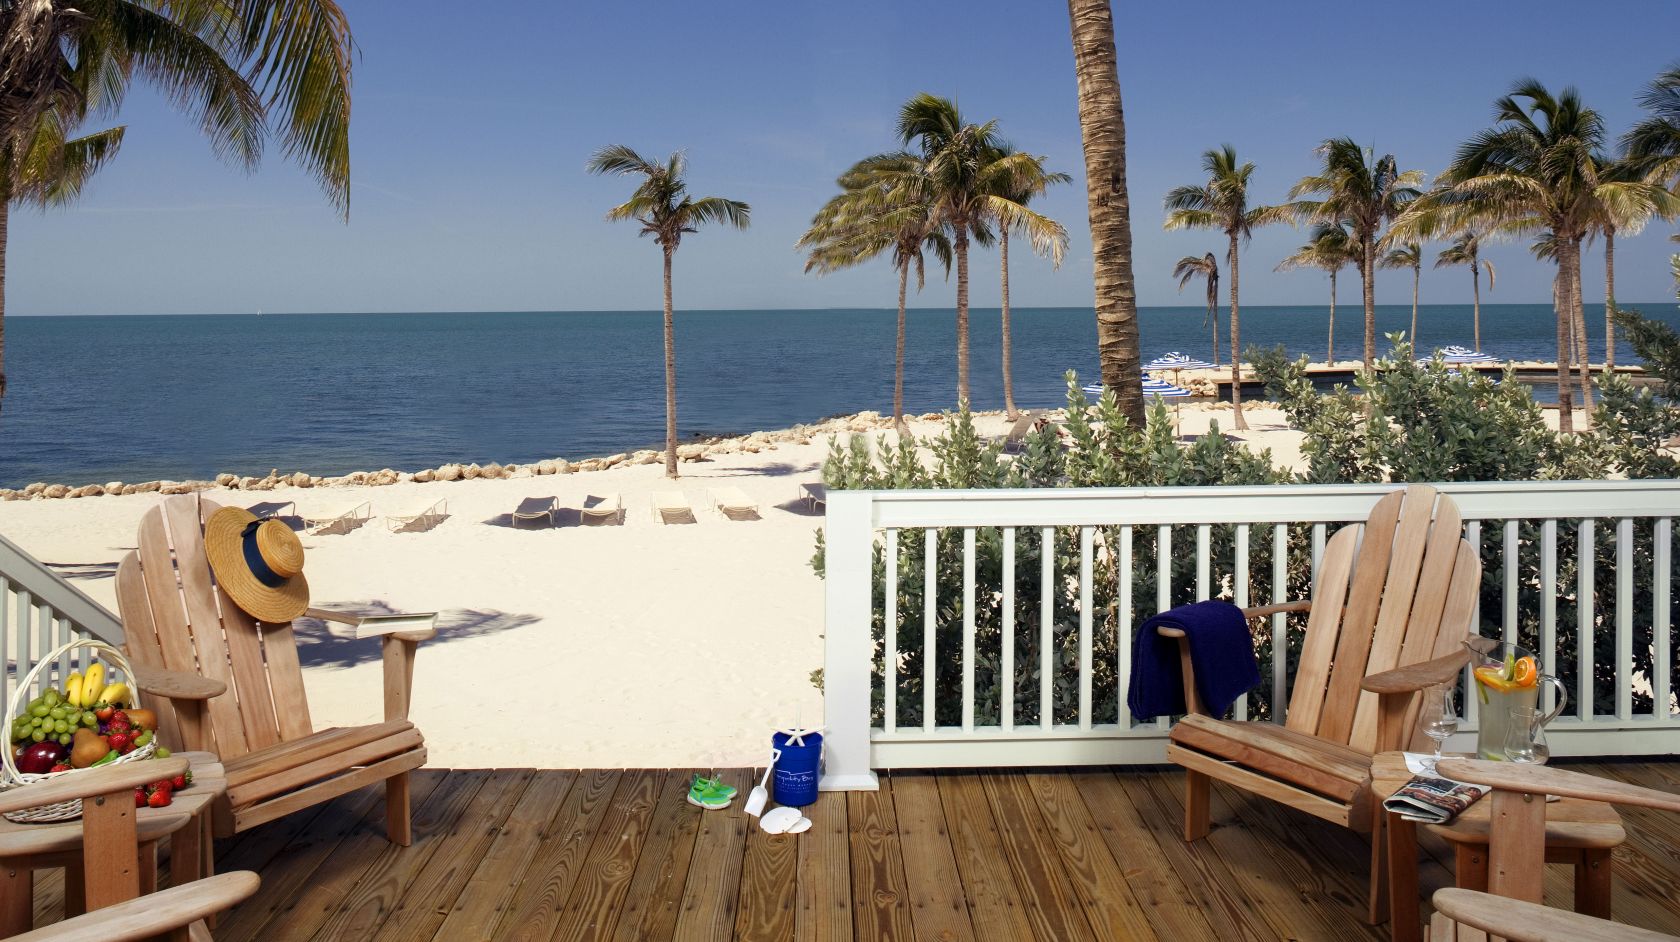 Step Onto the Sand From Your Florida Resort